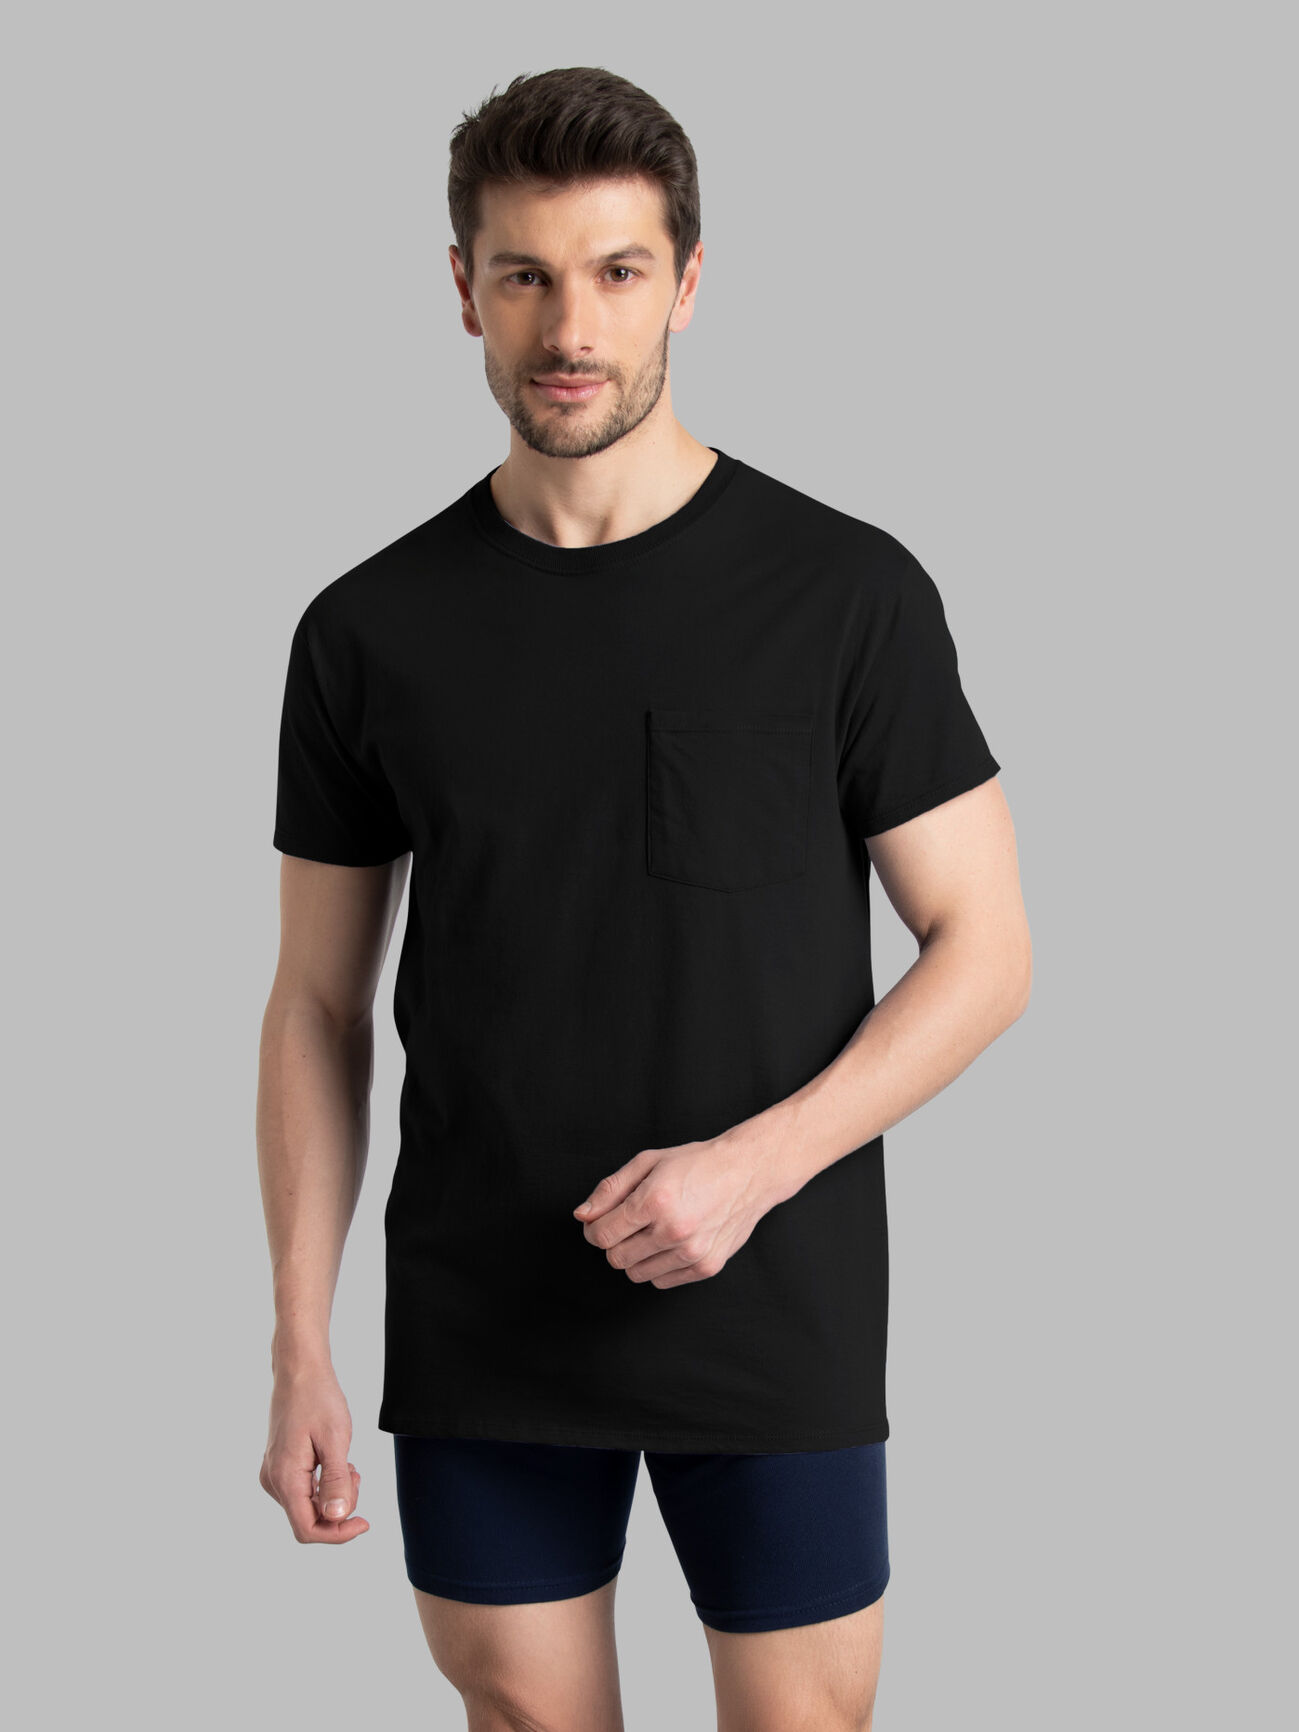   Essentials Men's Slim-Fit Short-Sleeve Crewneck Pocket  T-Shirt, Pack of 2, Black, X-Small : Clothing, Shoes & Jewelry